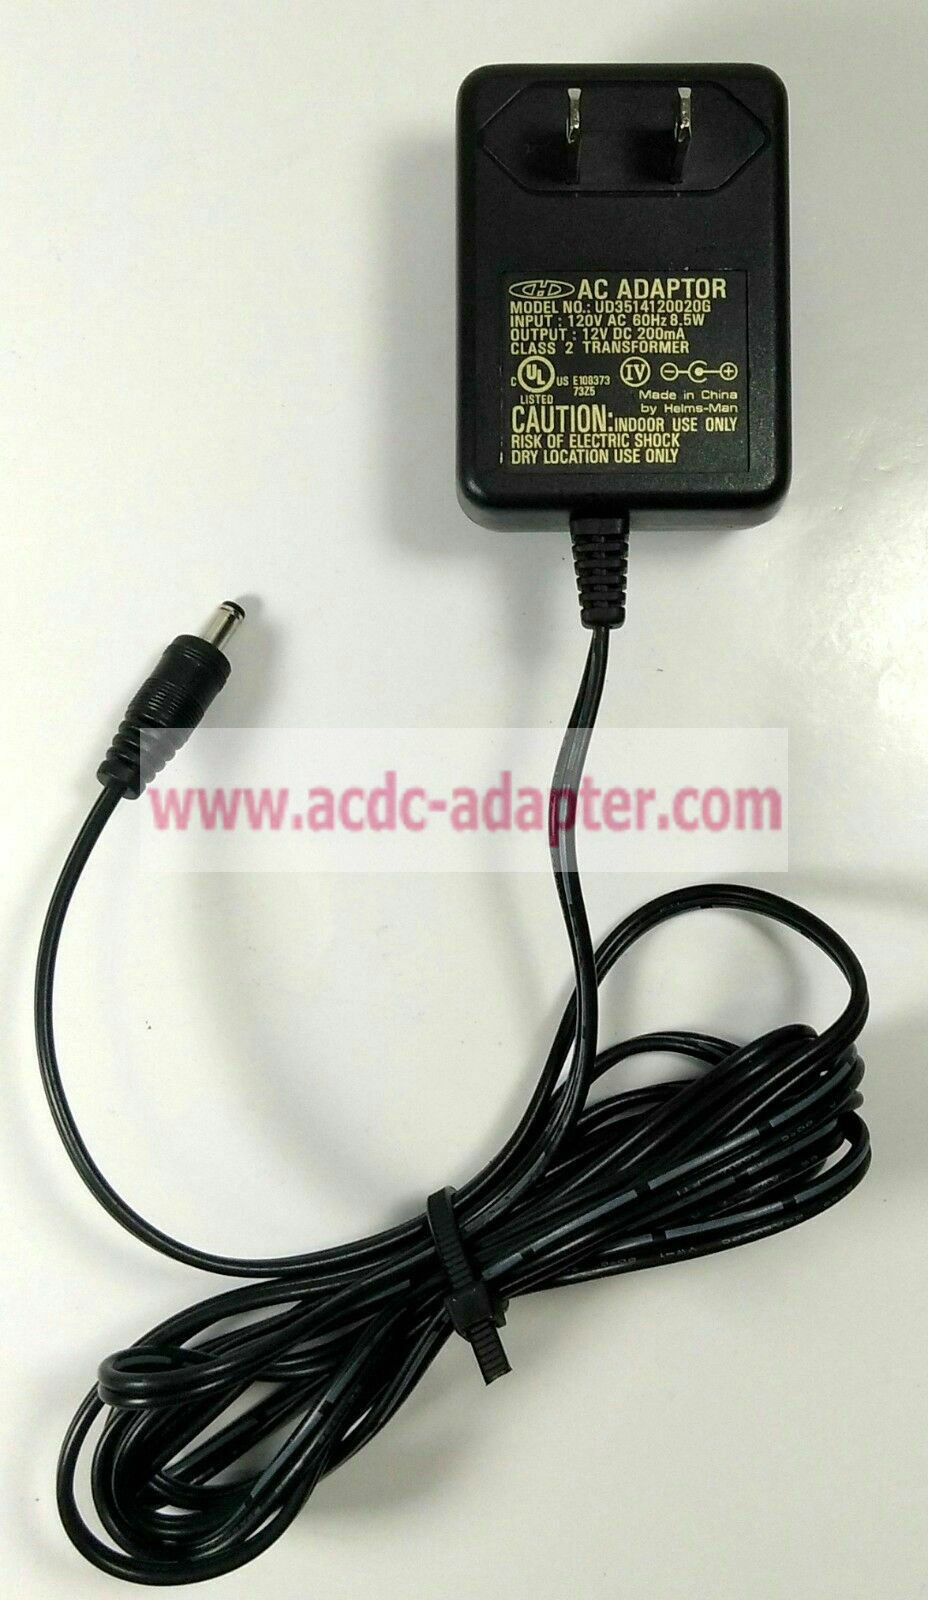 New "H" UD3514120020G 12V 200mA AC Adapter AC DC Power Supply Charger